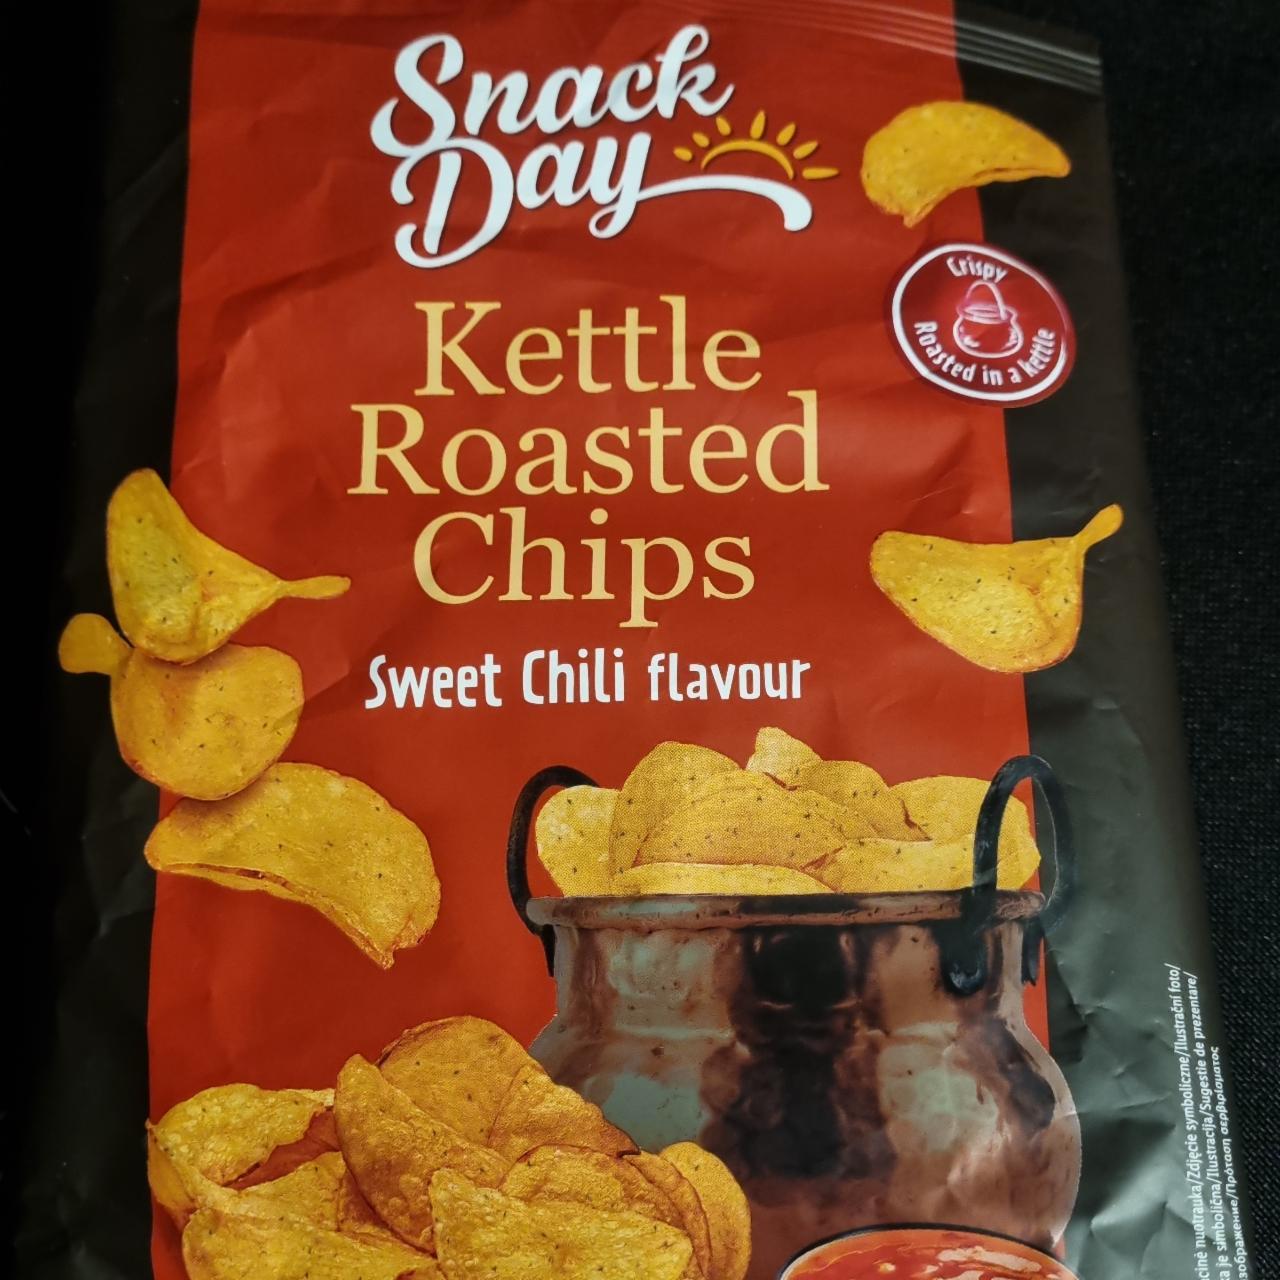 Fotografie - Kettle Roasted Chips Sweet Chili flavour Snack Day